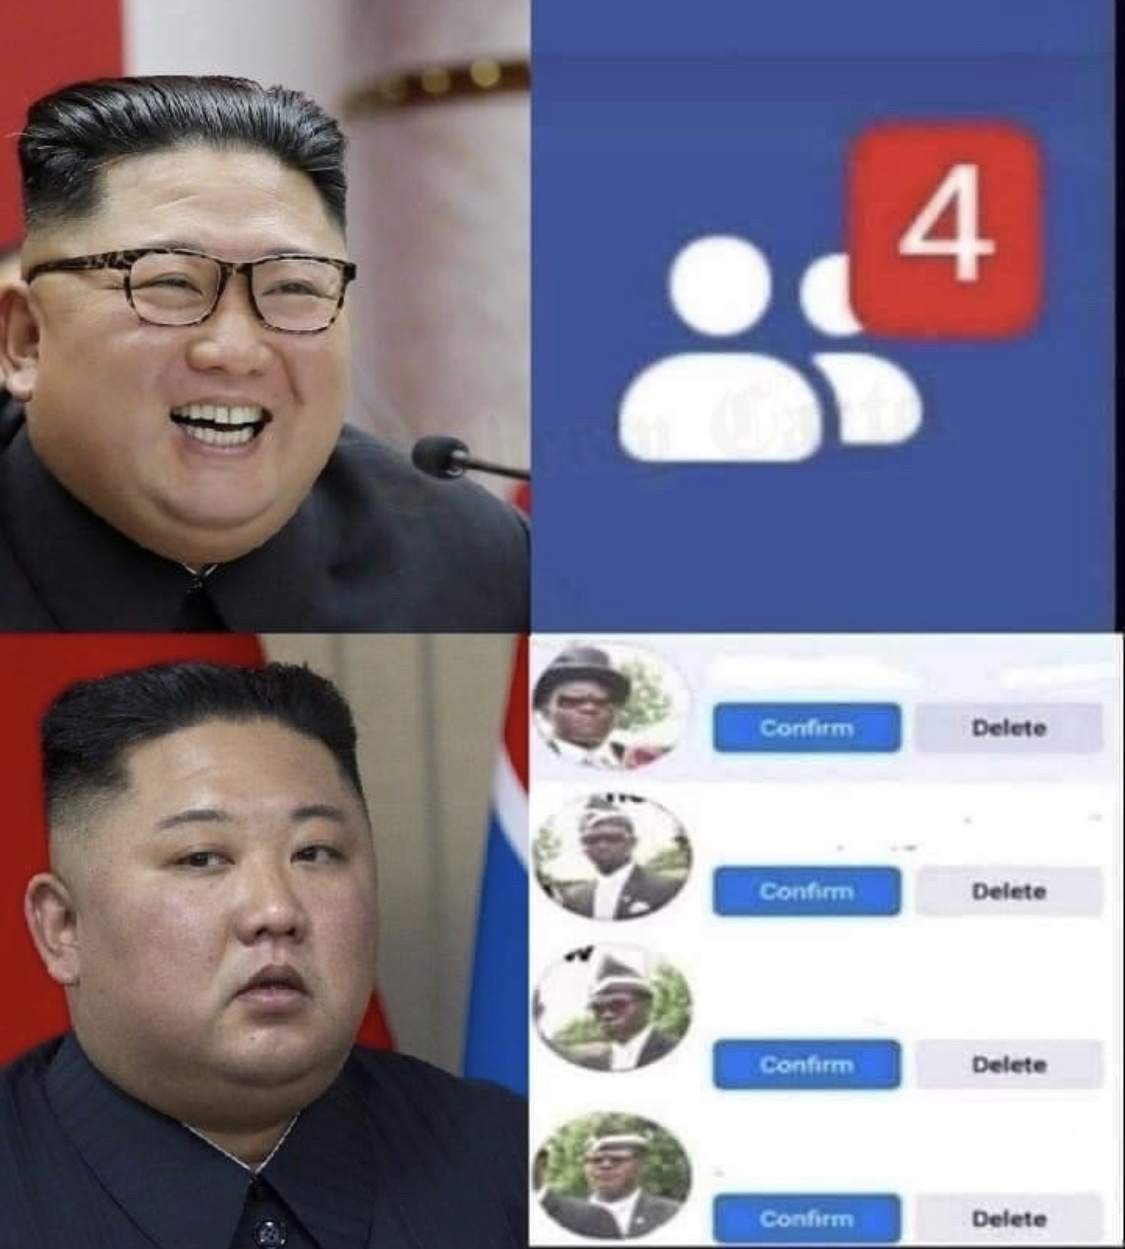 Kim meet your new friends and be nice son - meme